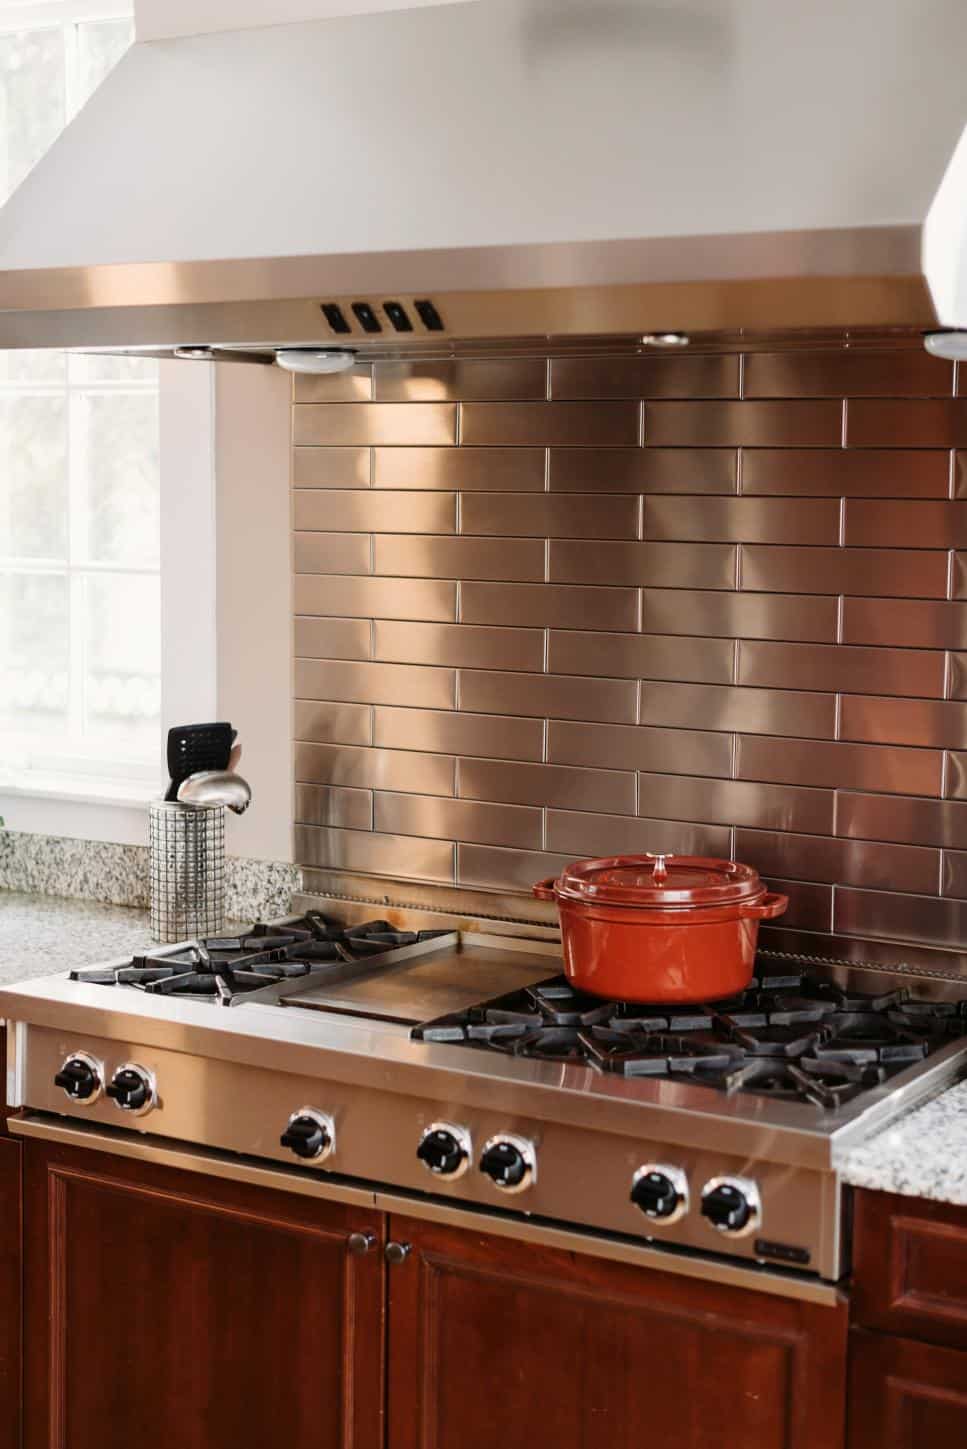 Stainless Steel Backsplash The Pros, The Cons, and The Ideas